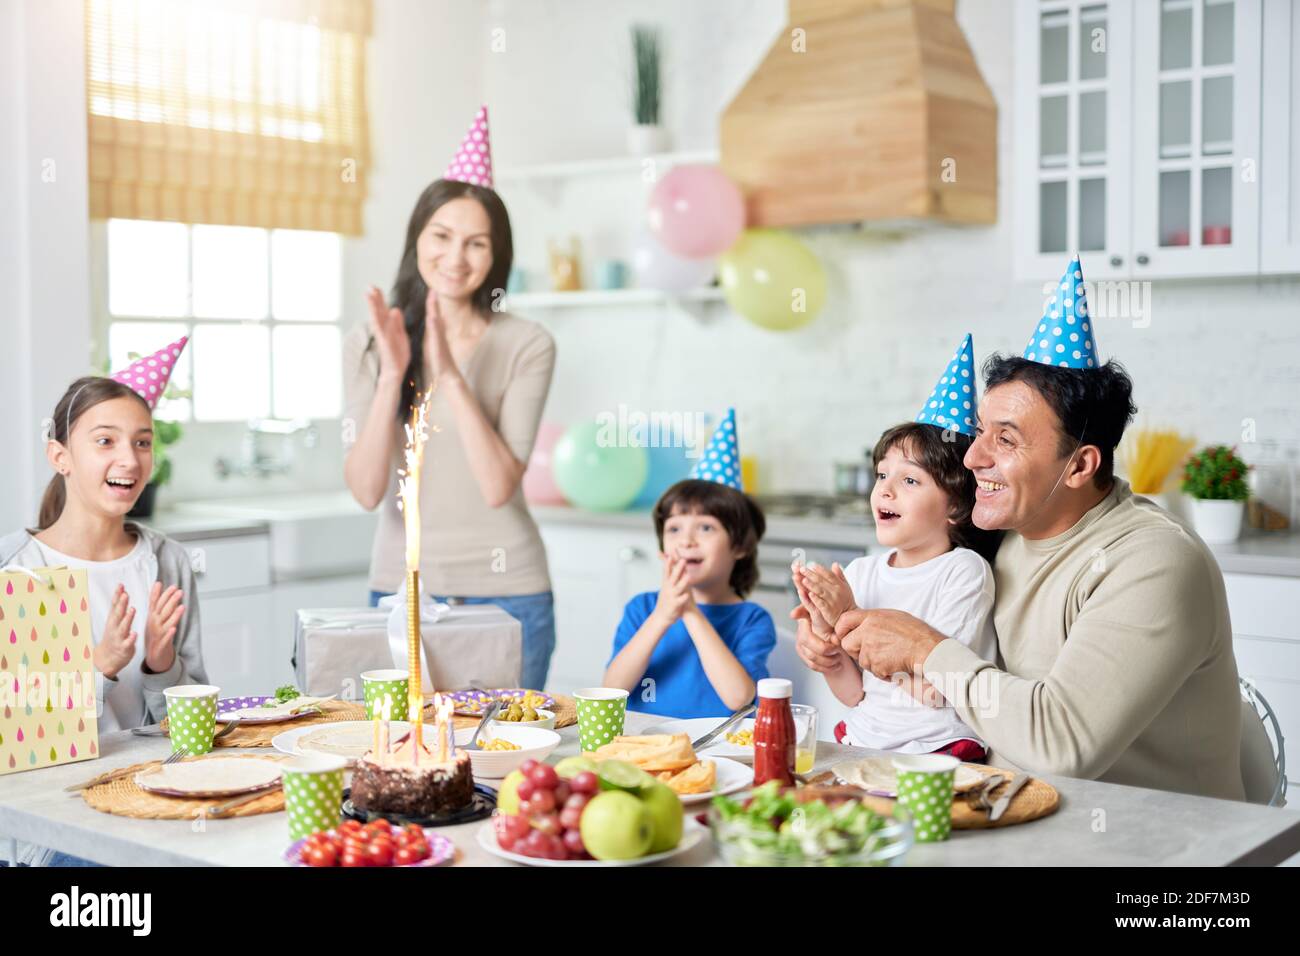 Joyful hispanic family with children looking happy, clapping while celebrating birthday together at home. Parenthood, celebration concept. Selective focus Stock Photo